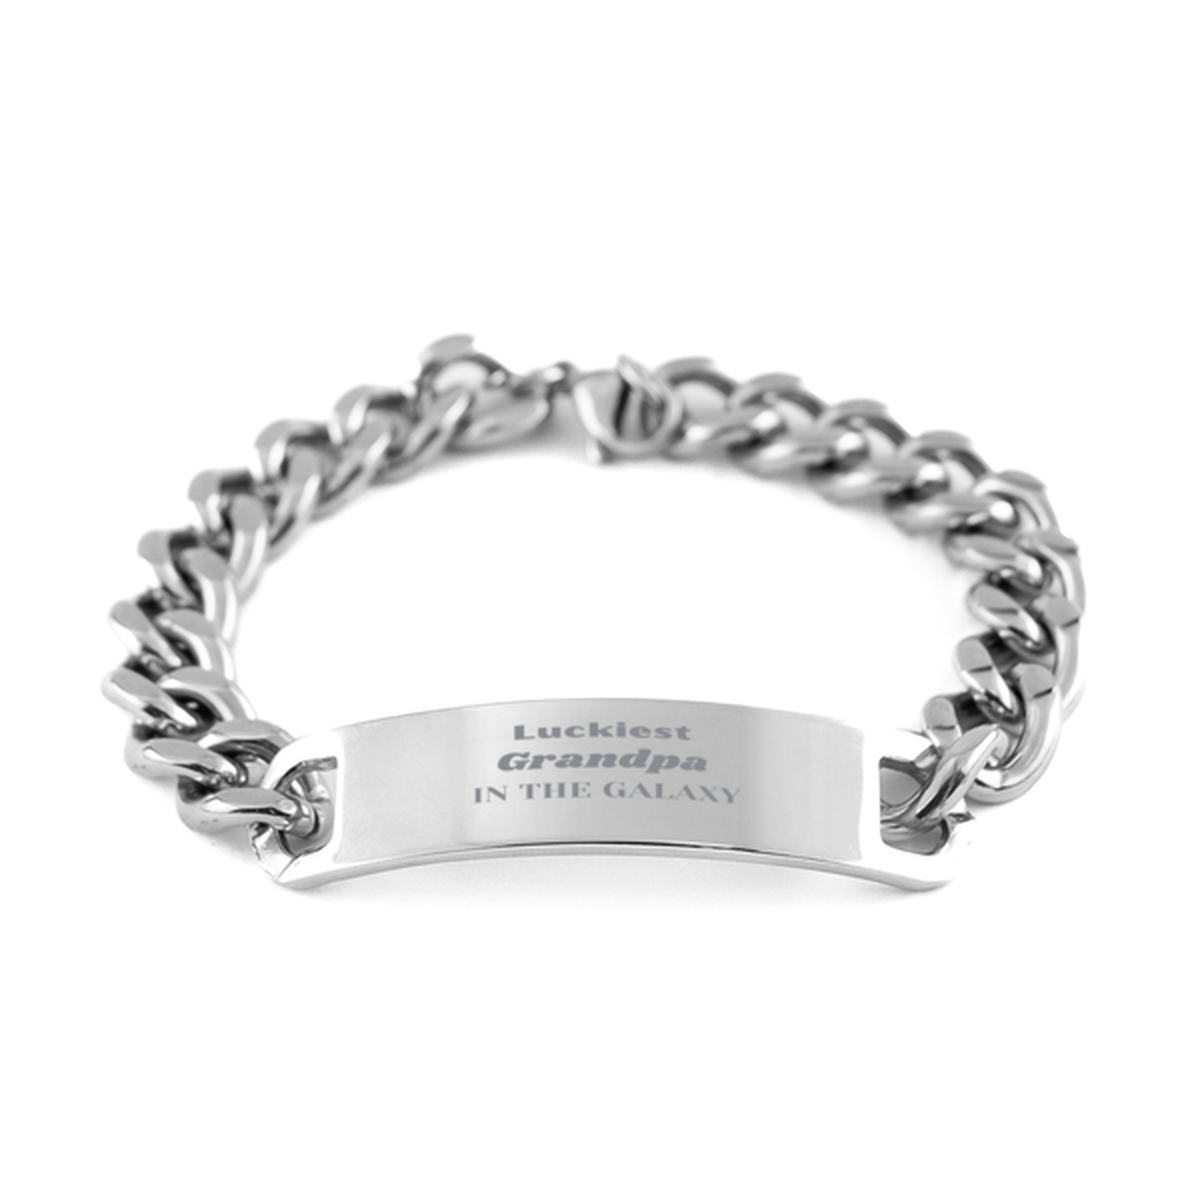 Luckiest Grandpa in the Galaxy, To My Grandpa Engraved Gifts, Christmas Grandpa Cuban Chain Stainless Steel Bracelet Gifts, X-mas Birthday Unique Gifts For Grandpa Men Women